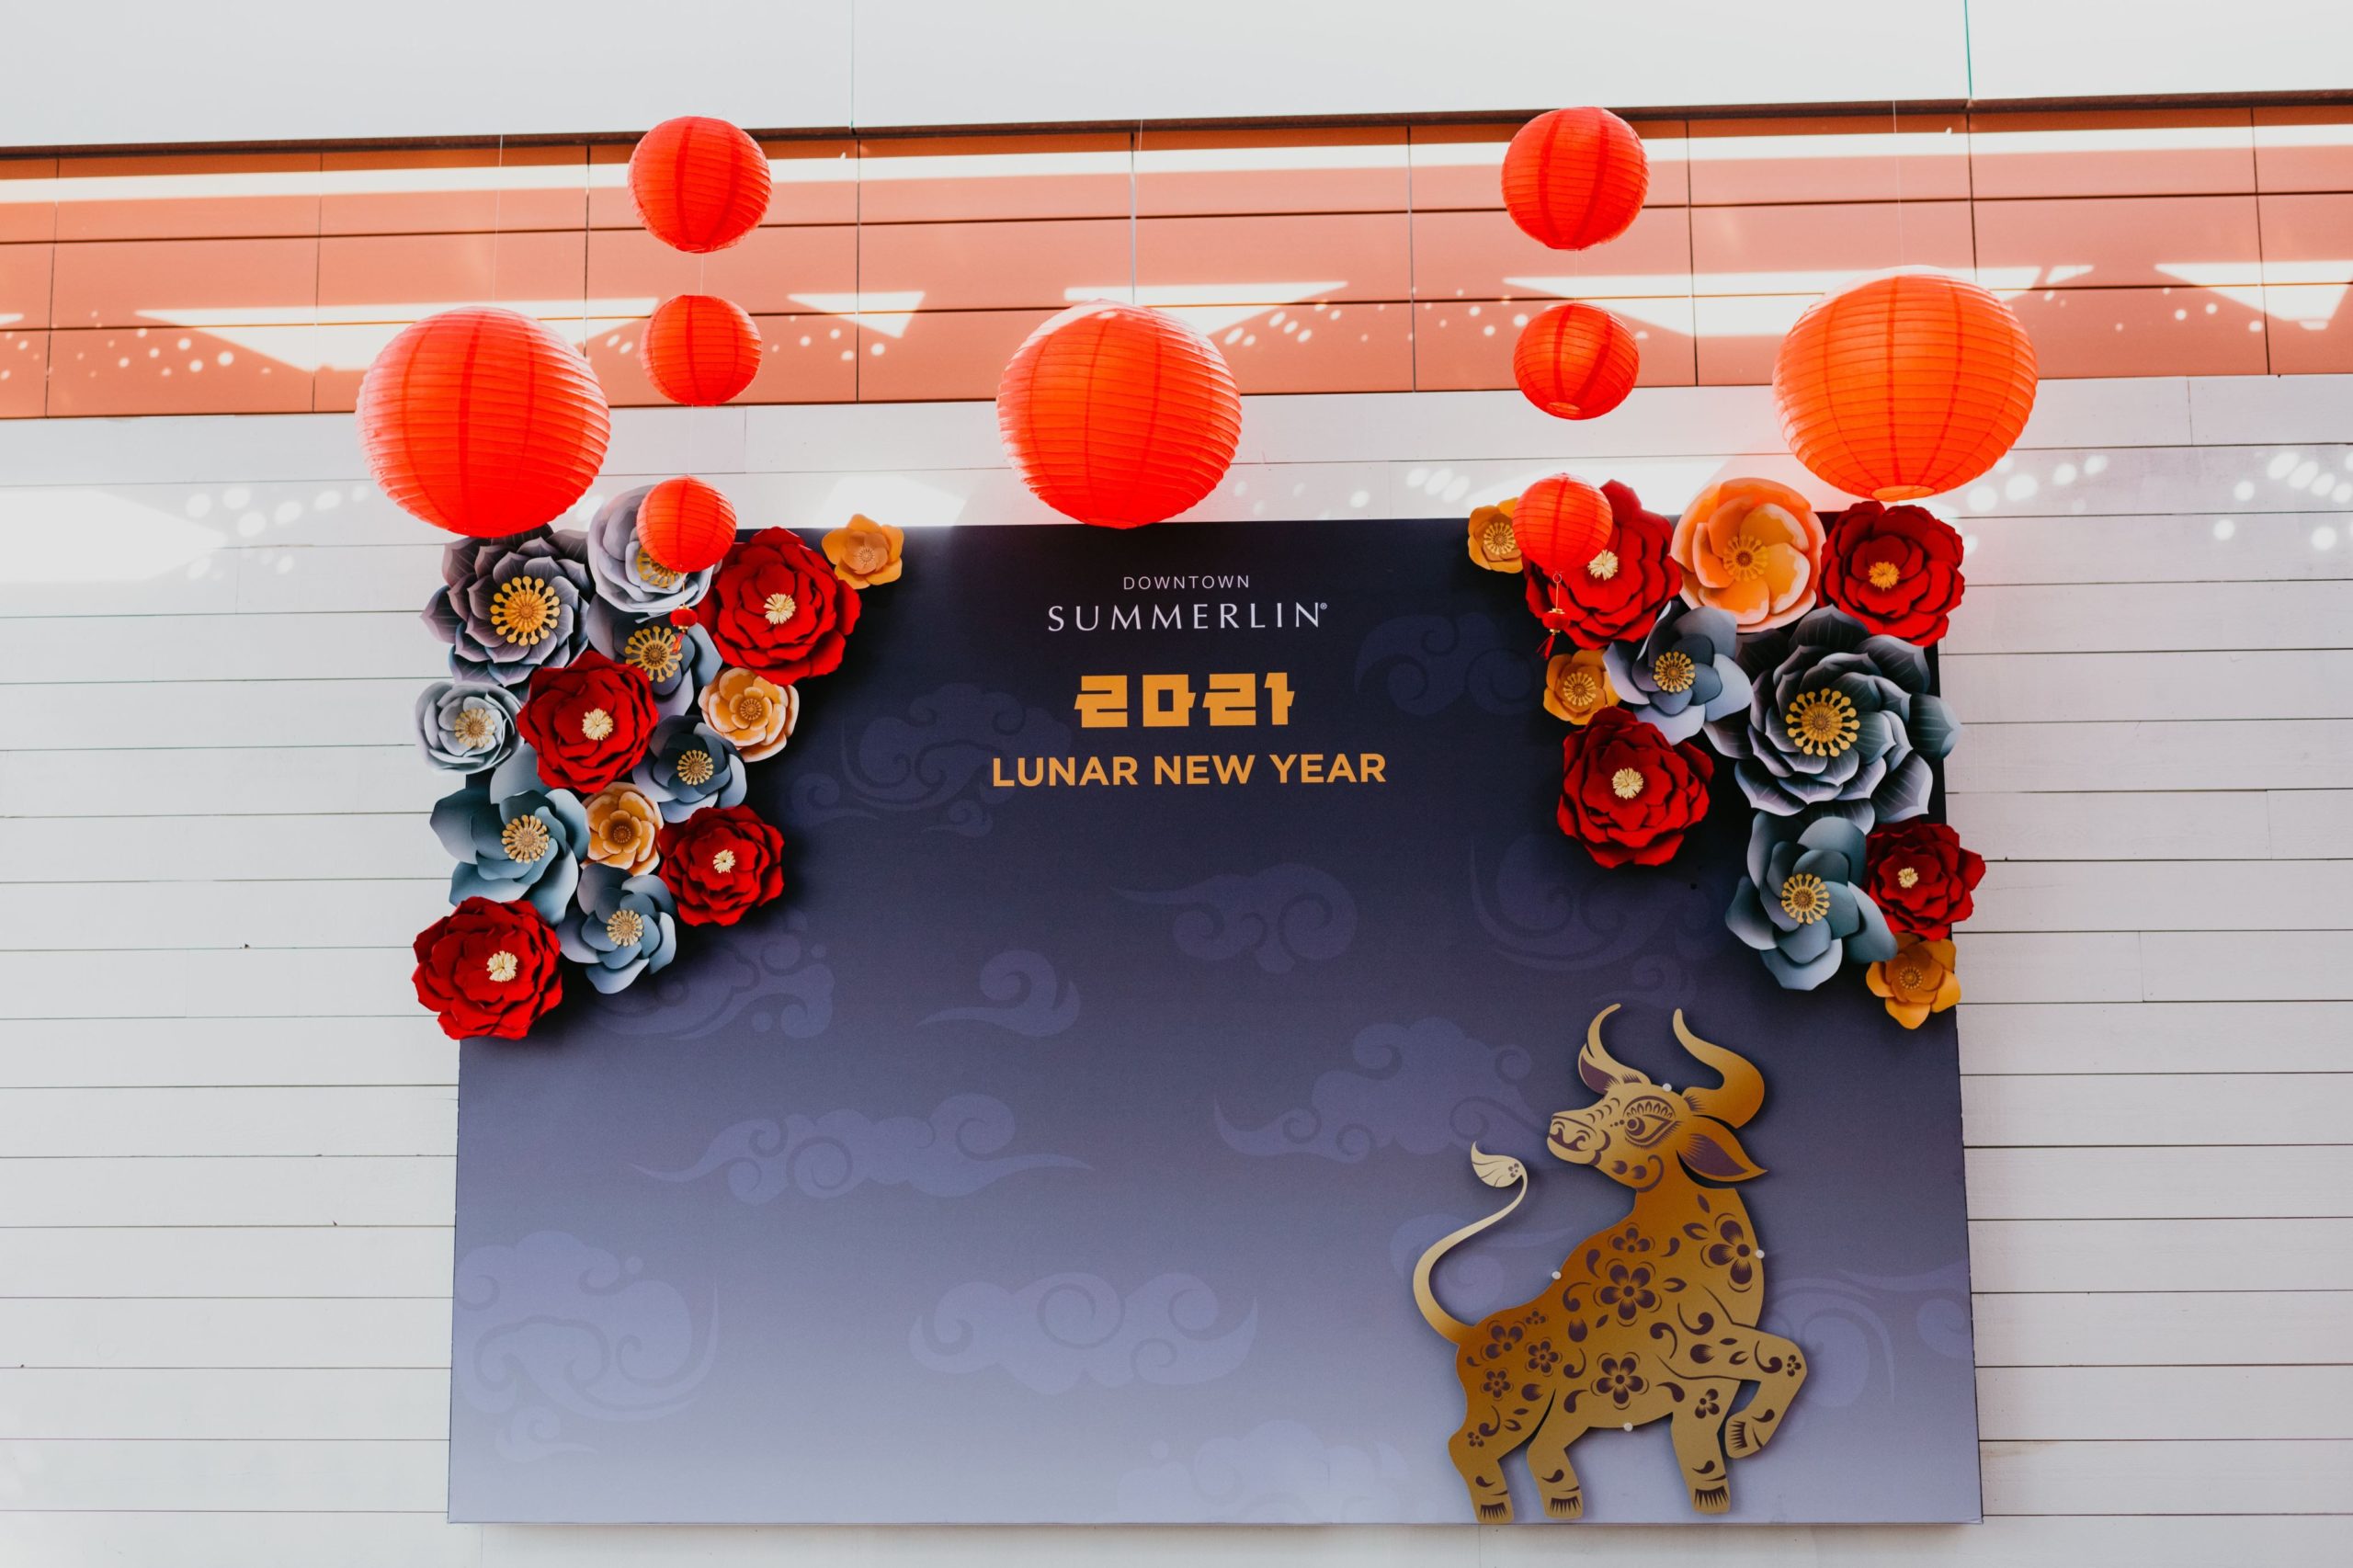 Lunar New Year Photo Op at Downtown Summerlin